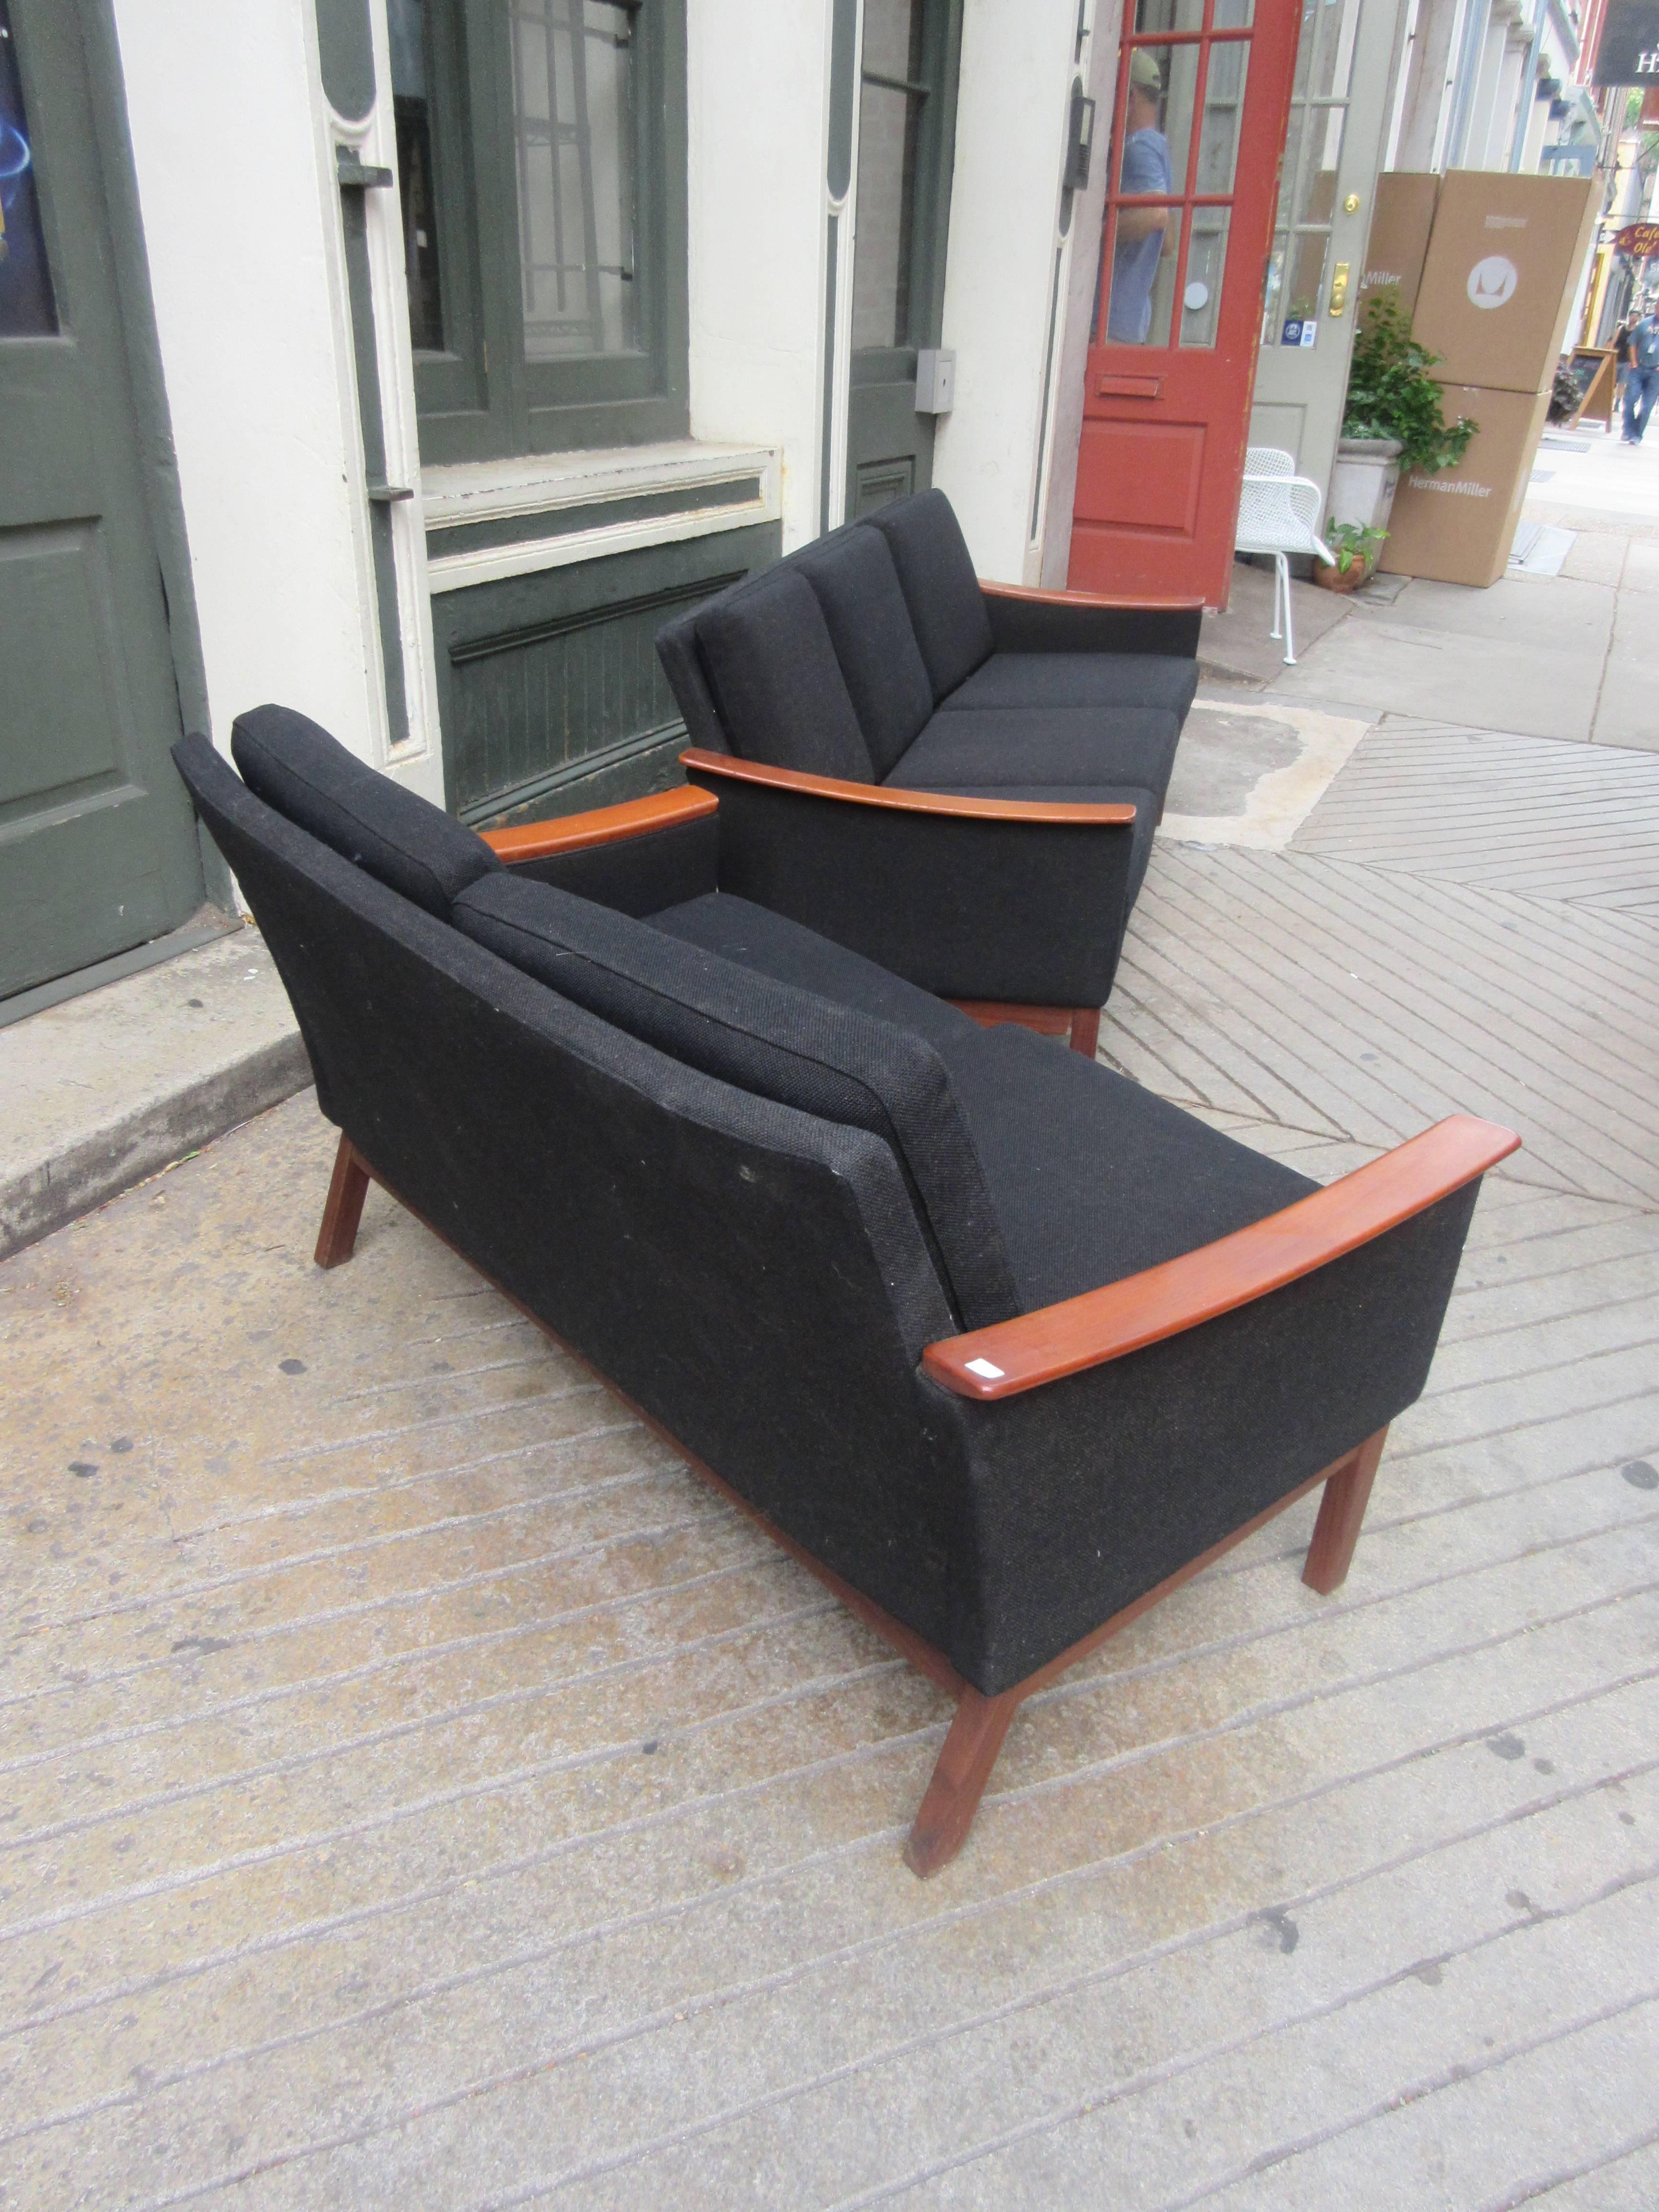 Suite consists of chair, settee and sofa in original black hopsack wool fabric. The swooping teak arms have certainly served to save the fabric. All pieces are of the same height and depth differing only in width with arm being identical. Measures: